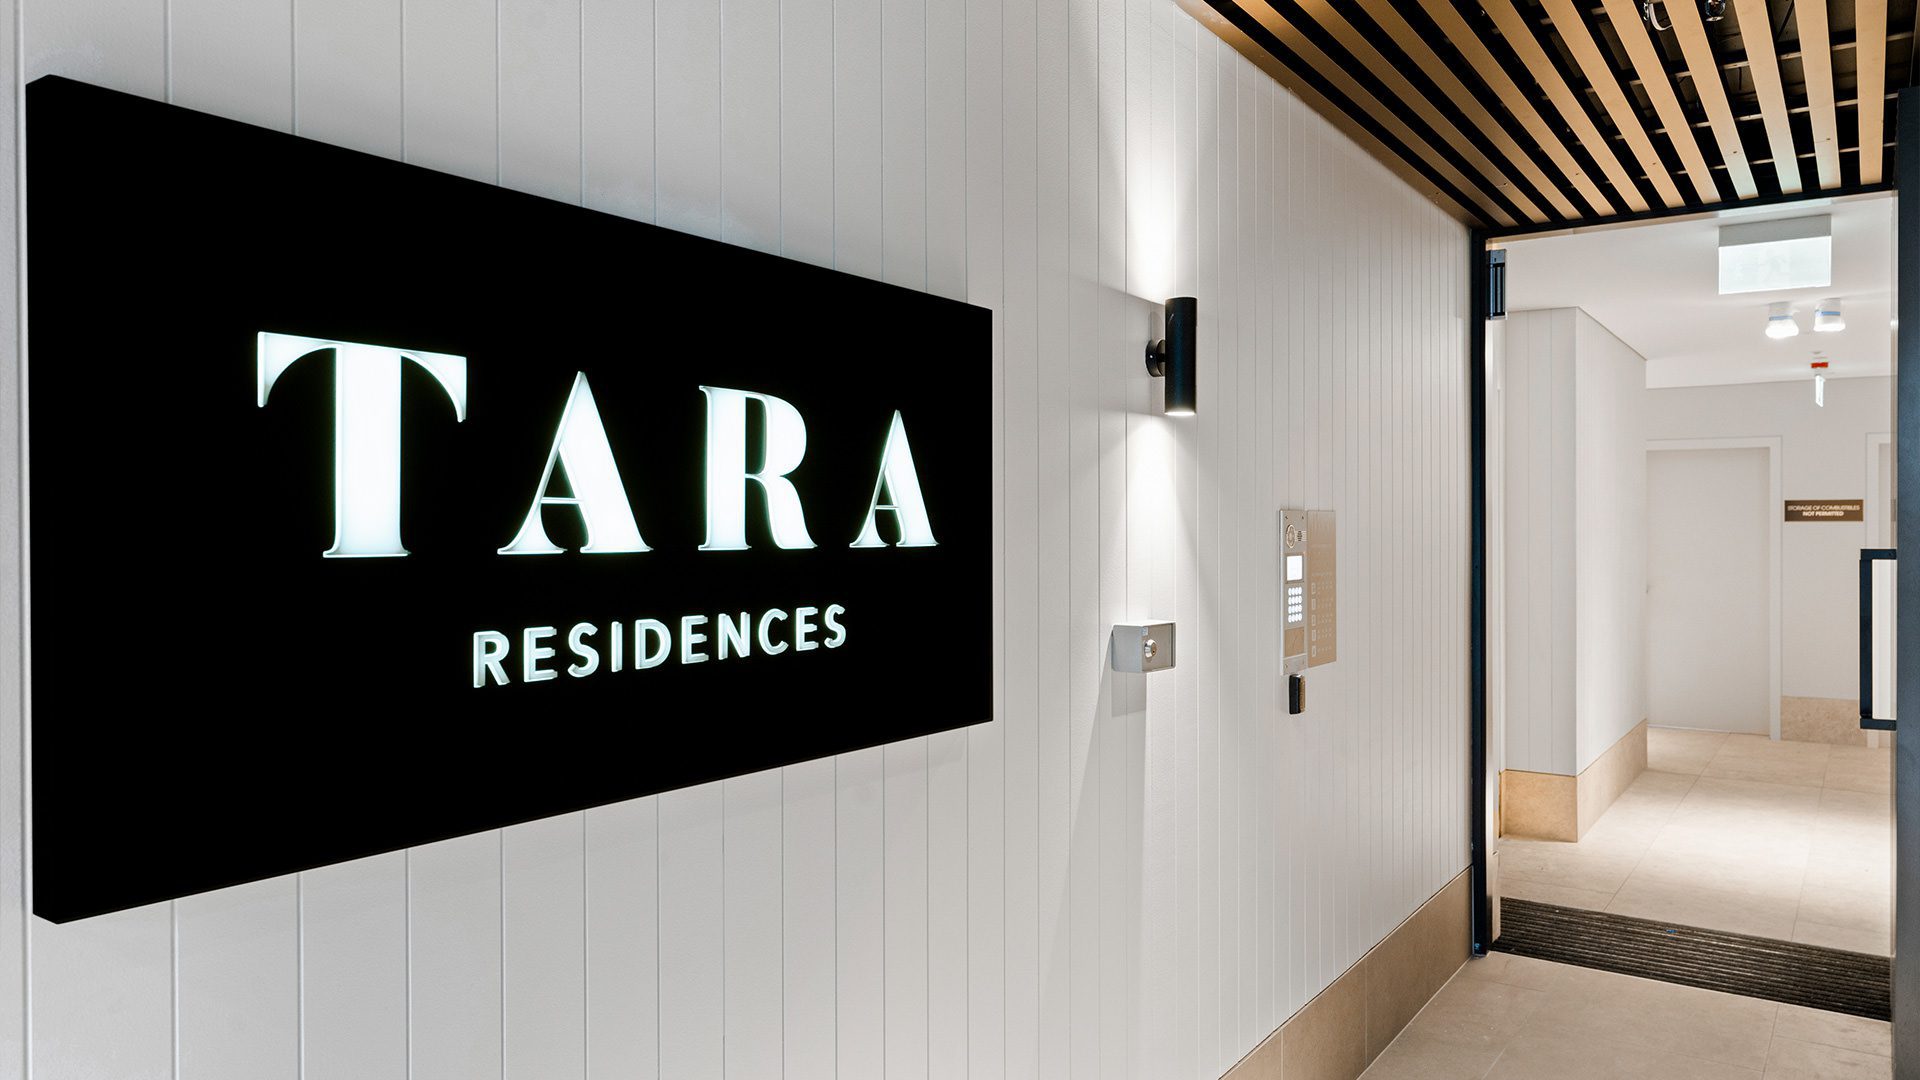 tara-lane-cove-by-hyecorp-completed-foyer-01